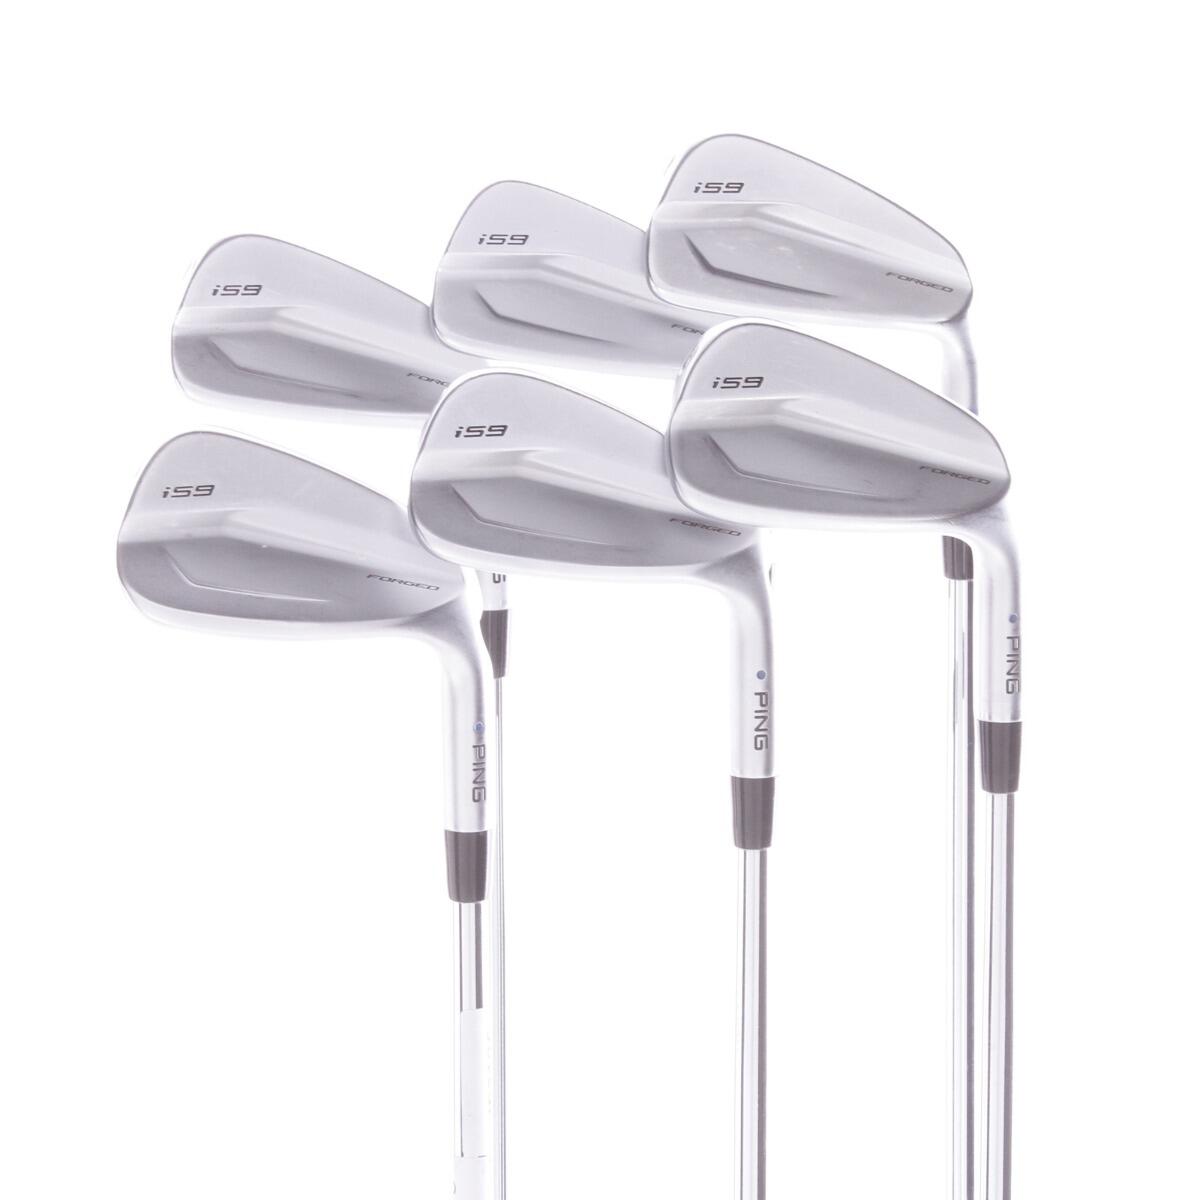 PING USED - Iron Set 5-PW Ping I59 Steel Shaft Right Handed - GRADE B